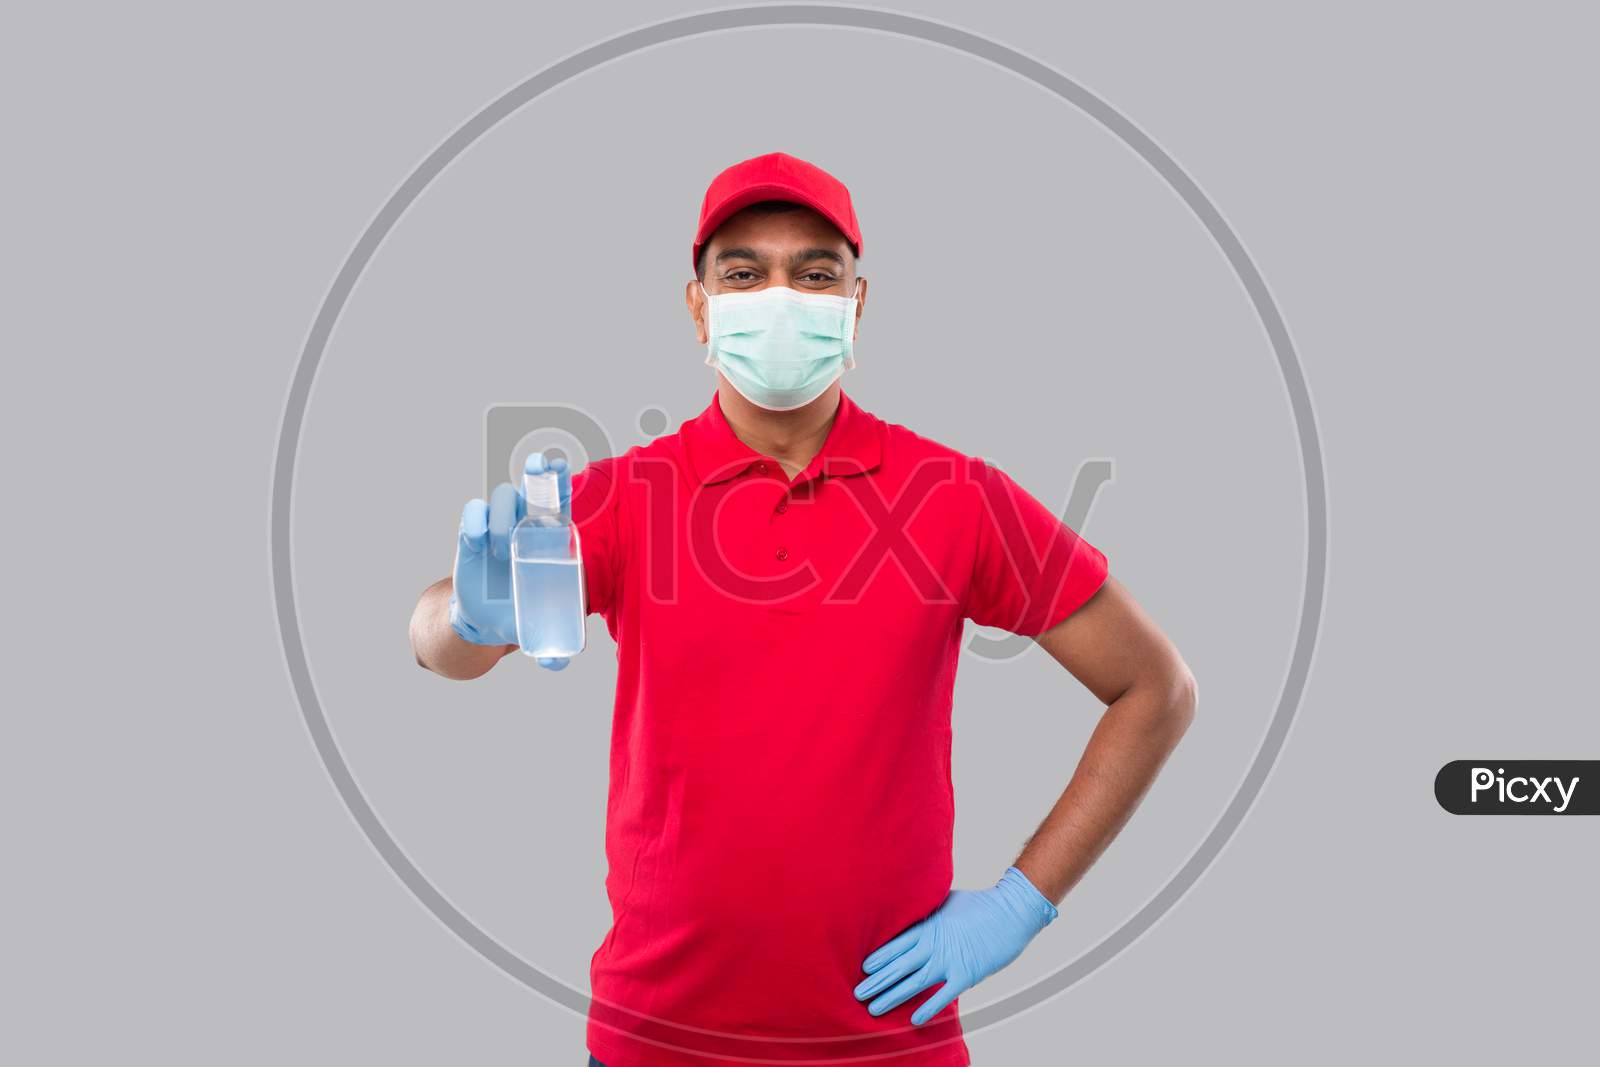 Delivery Man Showing Hands Sanitizer Wearing Medical Mask And Gloves Isolated. Indian Delivery Boy Holding Hand Antiseptic